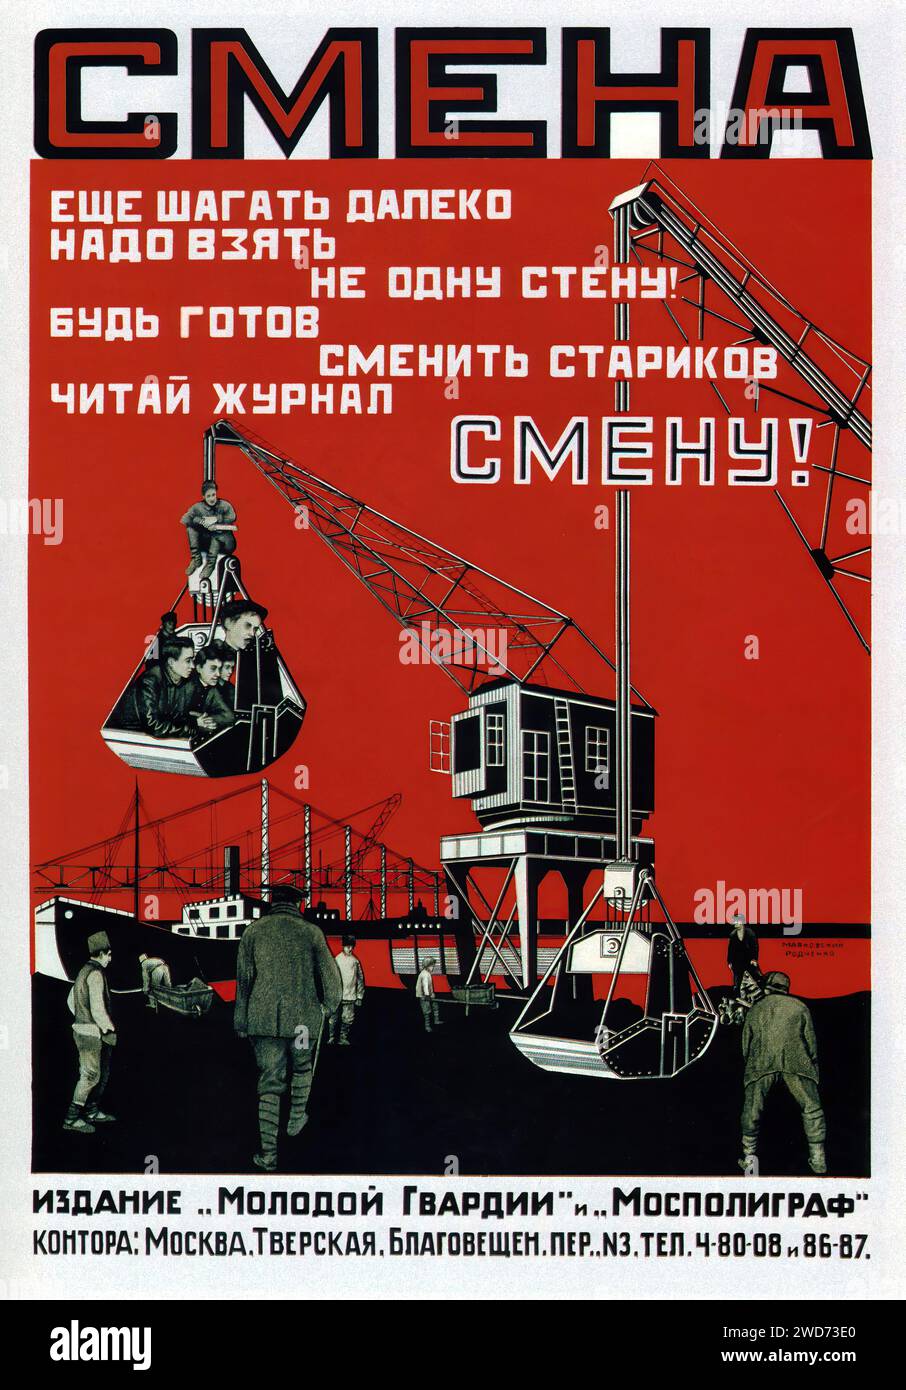 Vladimir Mayakovsky, Alexander Rodchenko. Smena magazine ad. 1924 - Vintage Soviet Advertising and propaganda - 'SMENA There's still a long way to go, we must take more than one wall be ready to replace the old read the magazine SMENA!' A graphic poster advertising 'SMENA' magazine, showcasing people in a crane bucket and construction in the background, symbolizing progress and the call for the youth to lead. The design uses bold typography and contrasting colors, embodying the constructivist style popular in the Soviet Union. Stock Photo